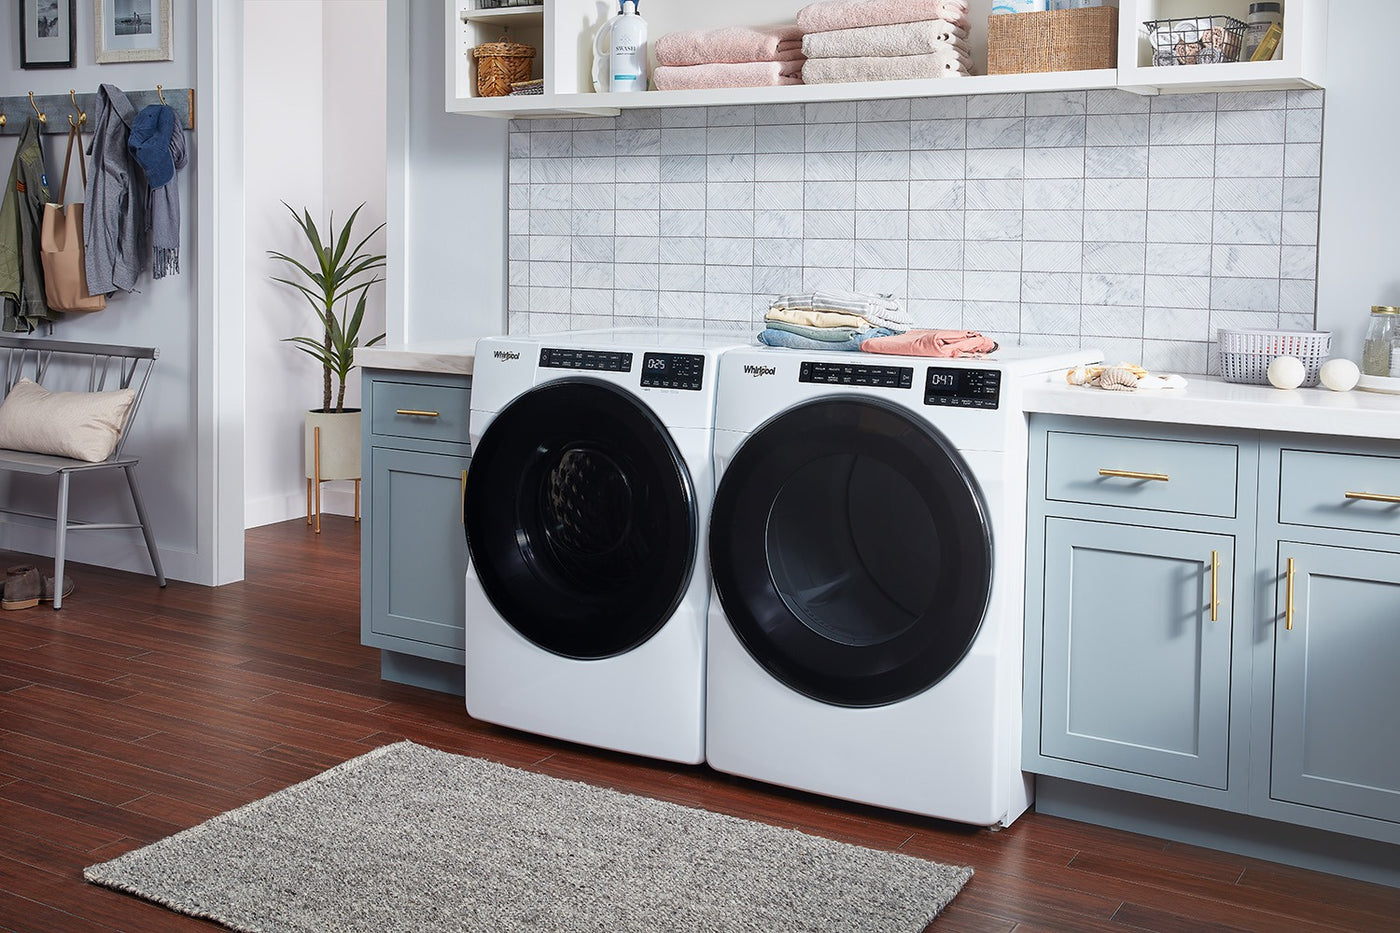 Whirlpool White Front-Load Washer (5.2 cu. ft.) & Electric Dryer (7.4 cu. ft.) - WFW5605MW/YWED5605MW